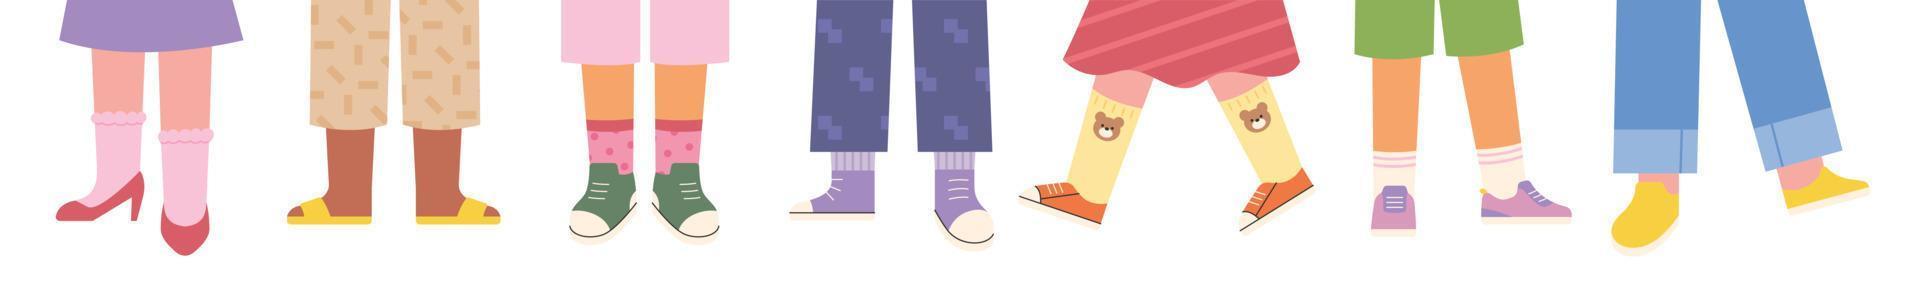 A collection of cute shoe fashions. flat design style vector illustration.